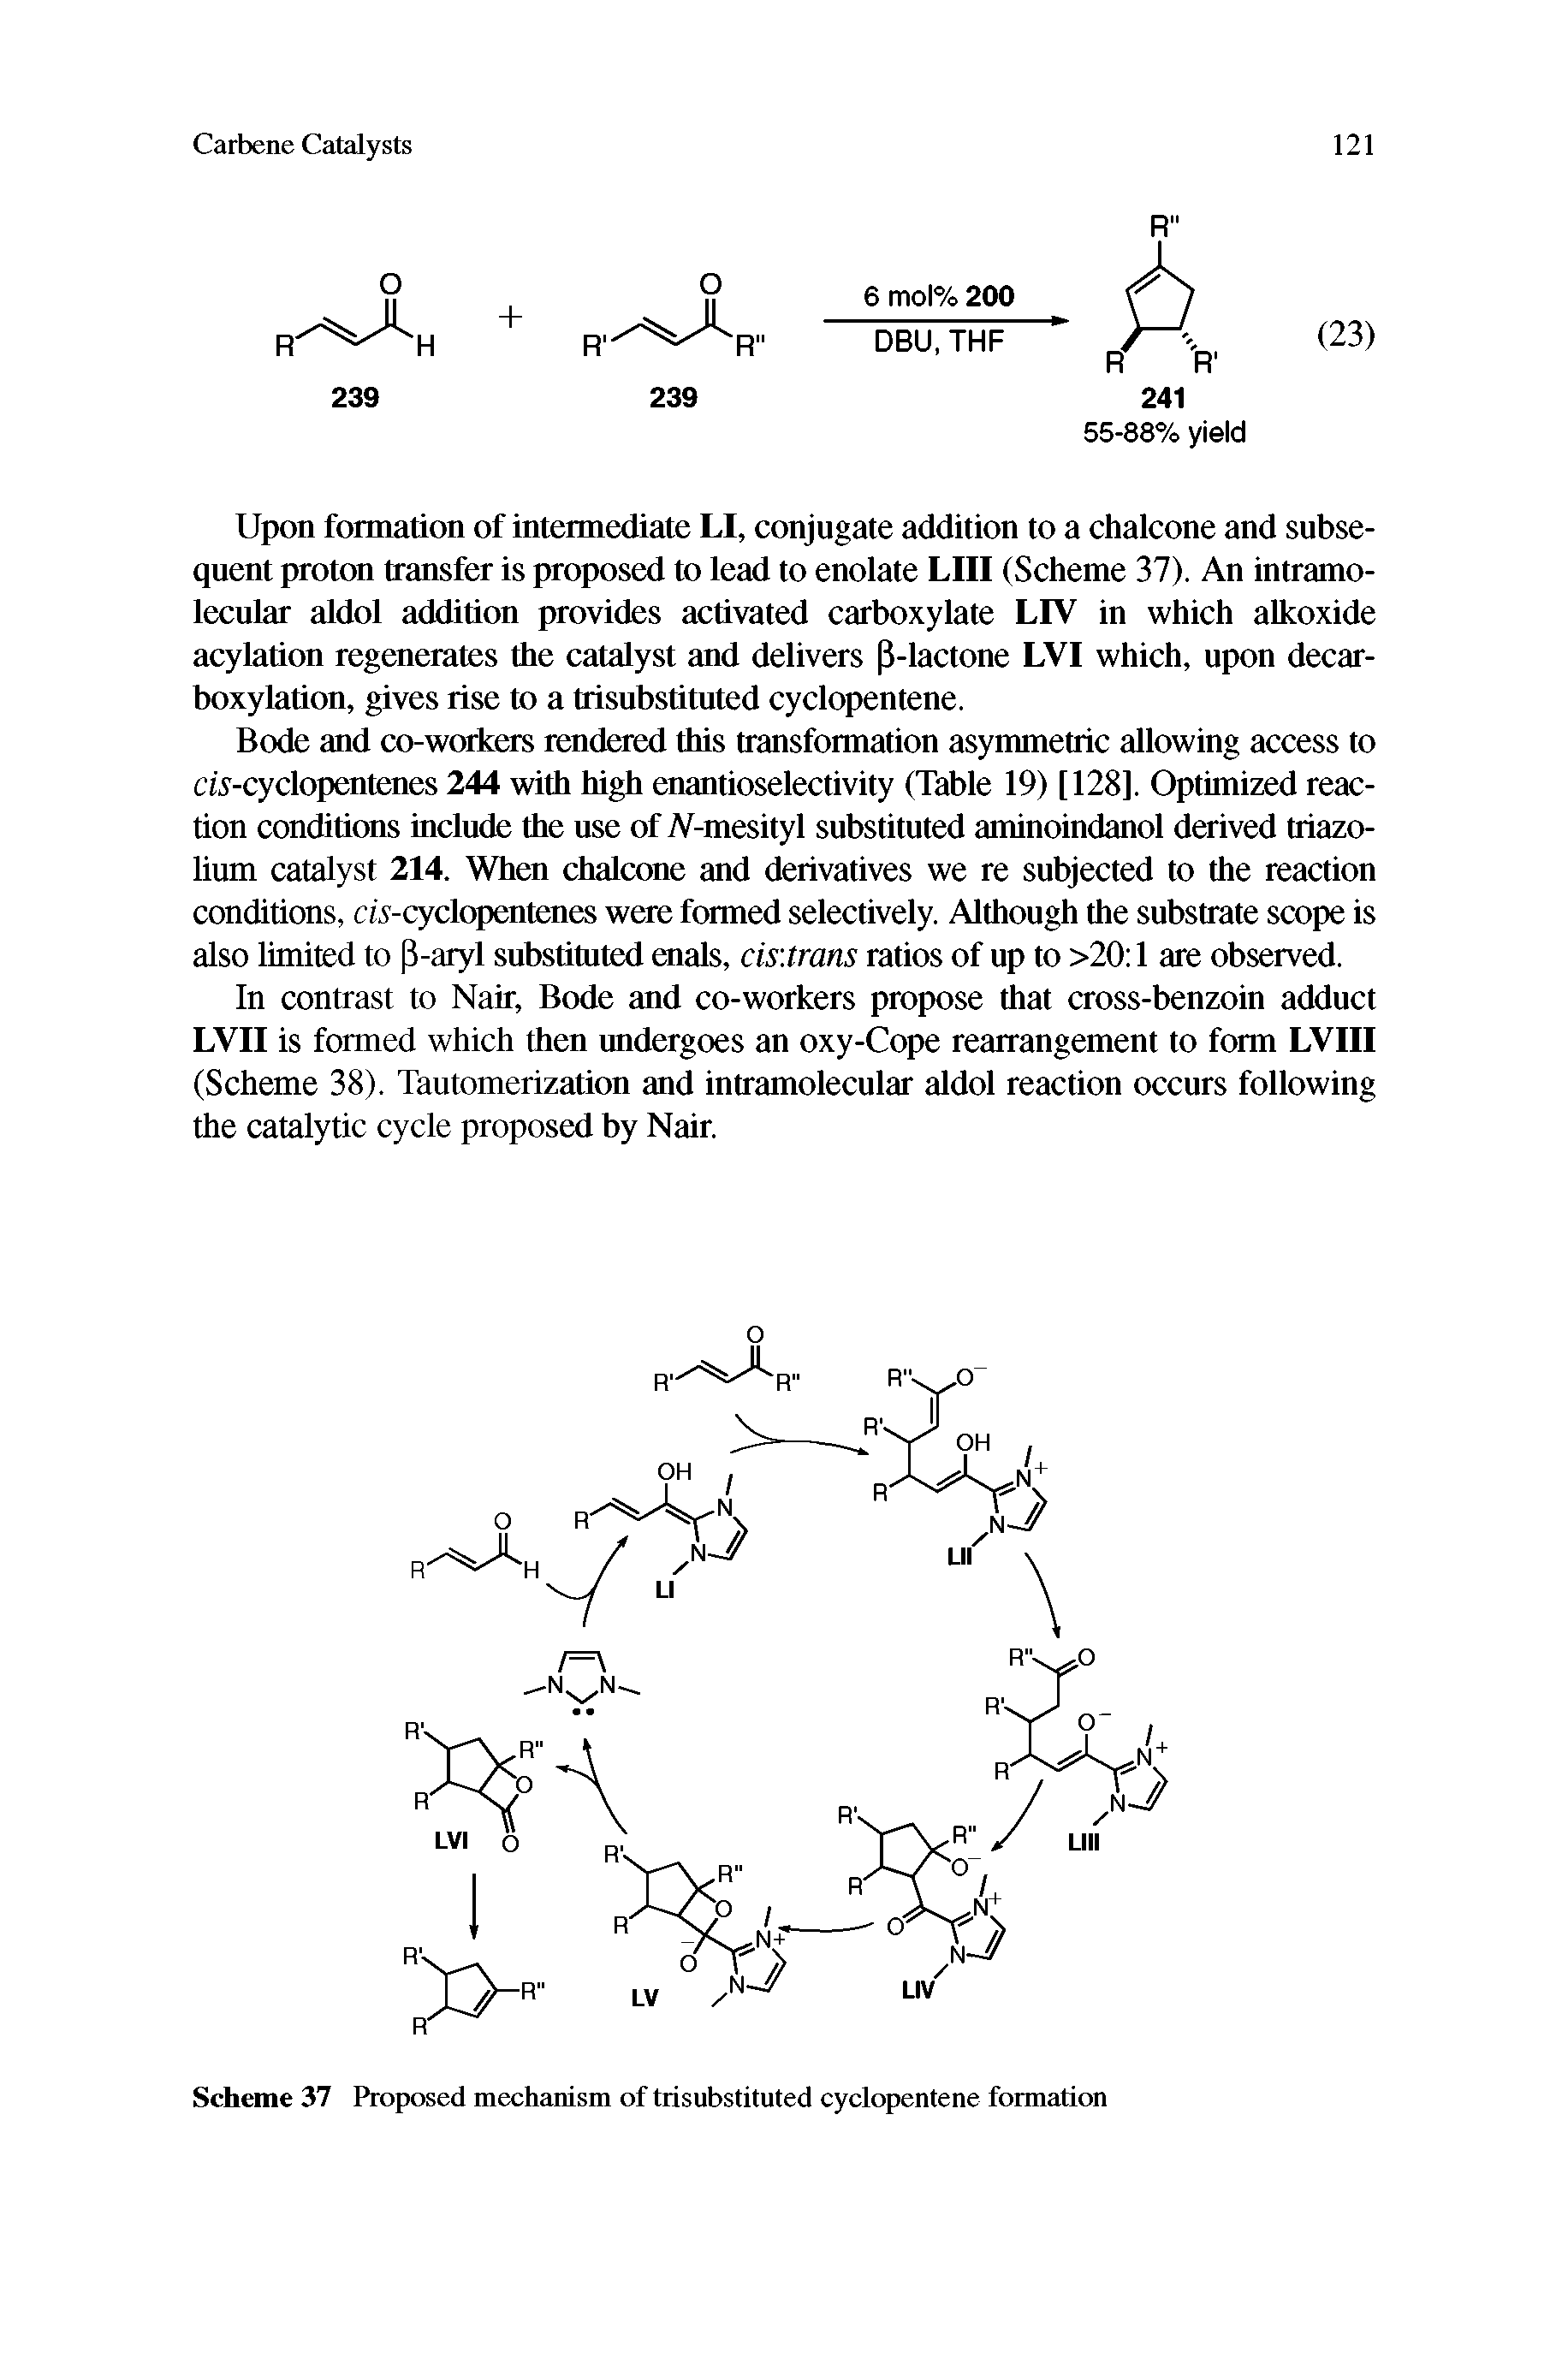 Scheme 37 Proposed mechanism of trisubstituted cyclopentene formation...